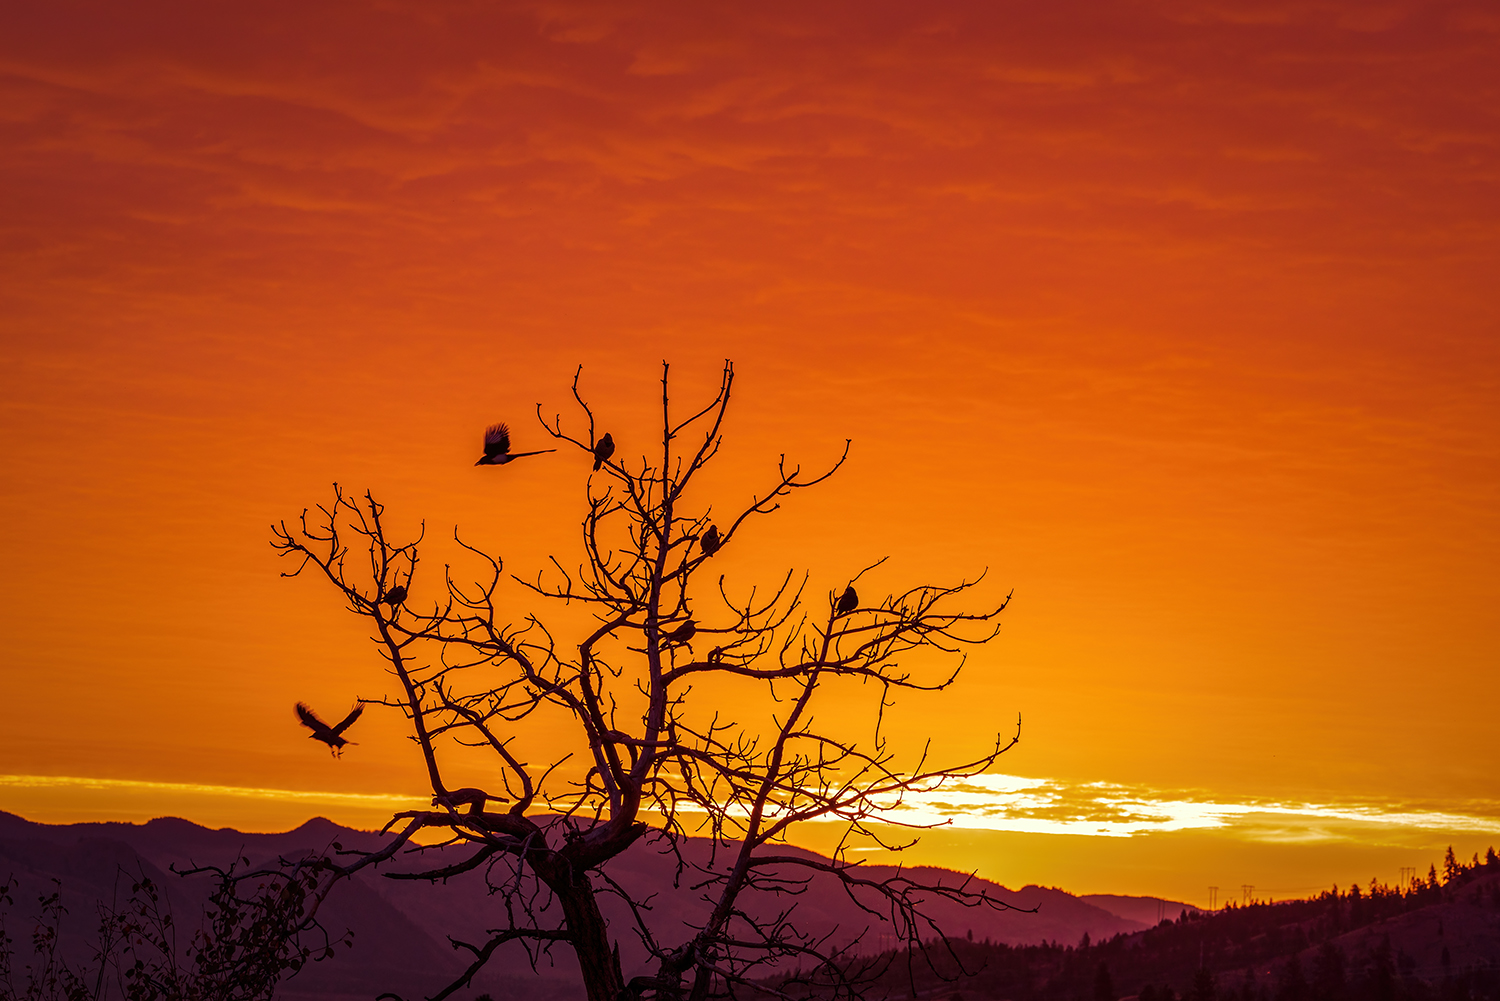 Kamloops Landscape orange and yellow bright sky with silhouette of tree and birds